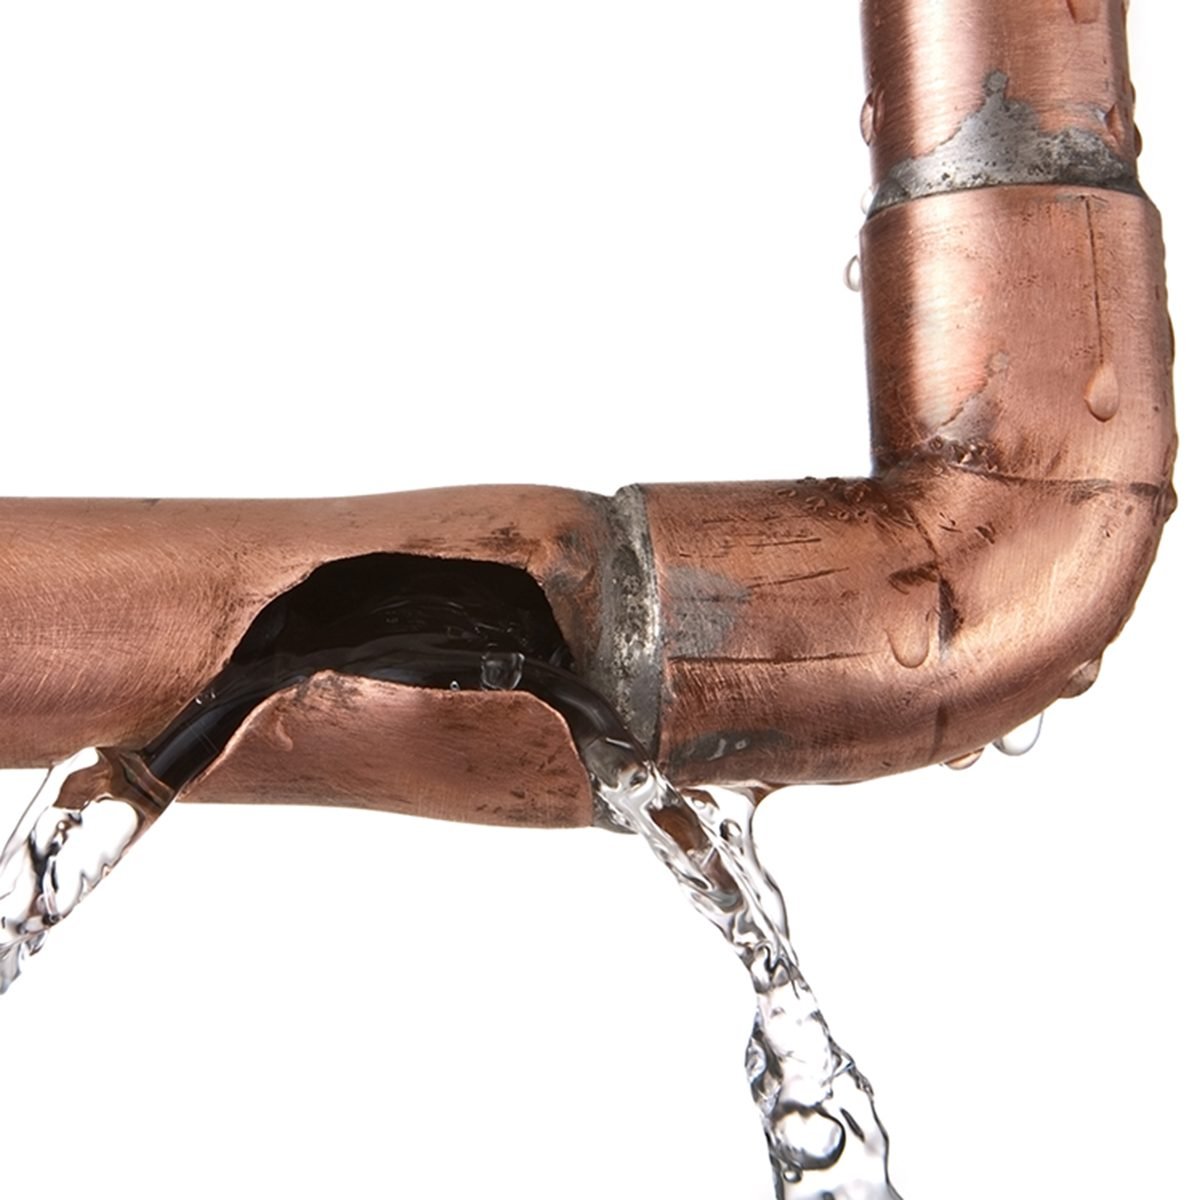 Signs of Frozen Pipes (And How to Unfreeze Them)